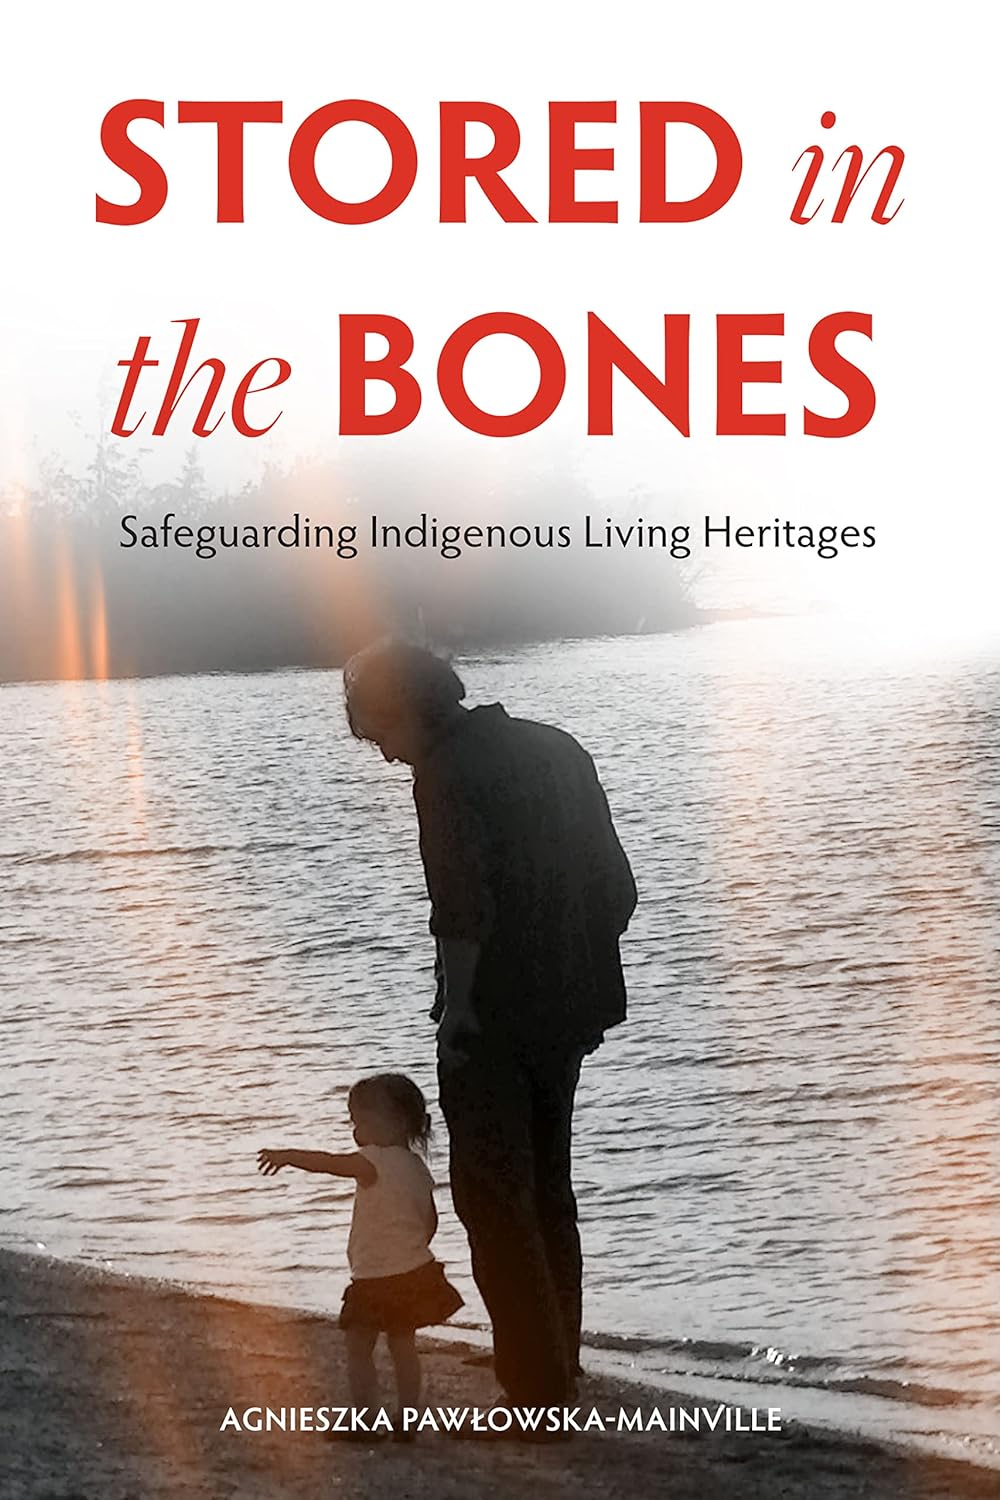 Stored in the Bones: Safeguarding Indigenous Living Heritages by Agnieszka Pawlowska-Mainville